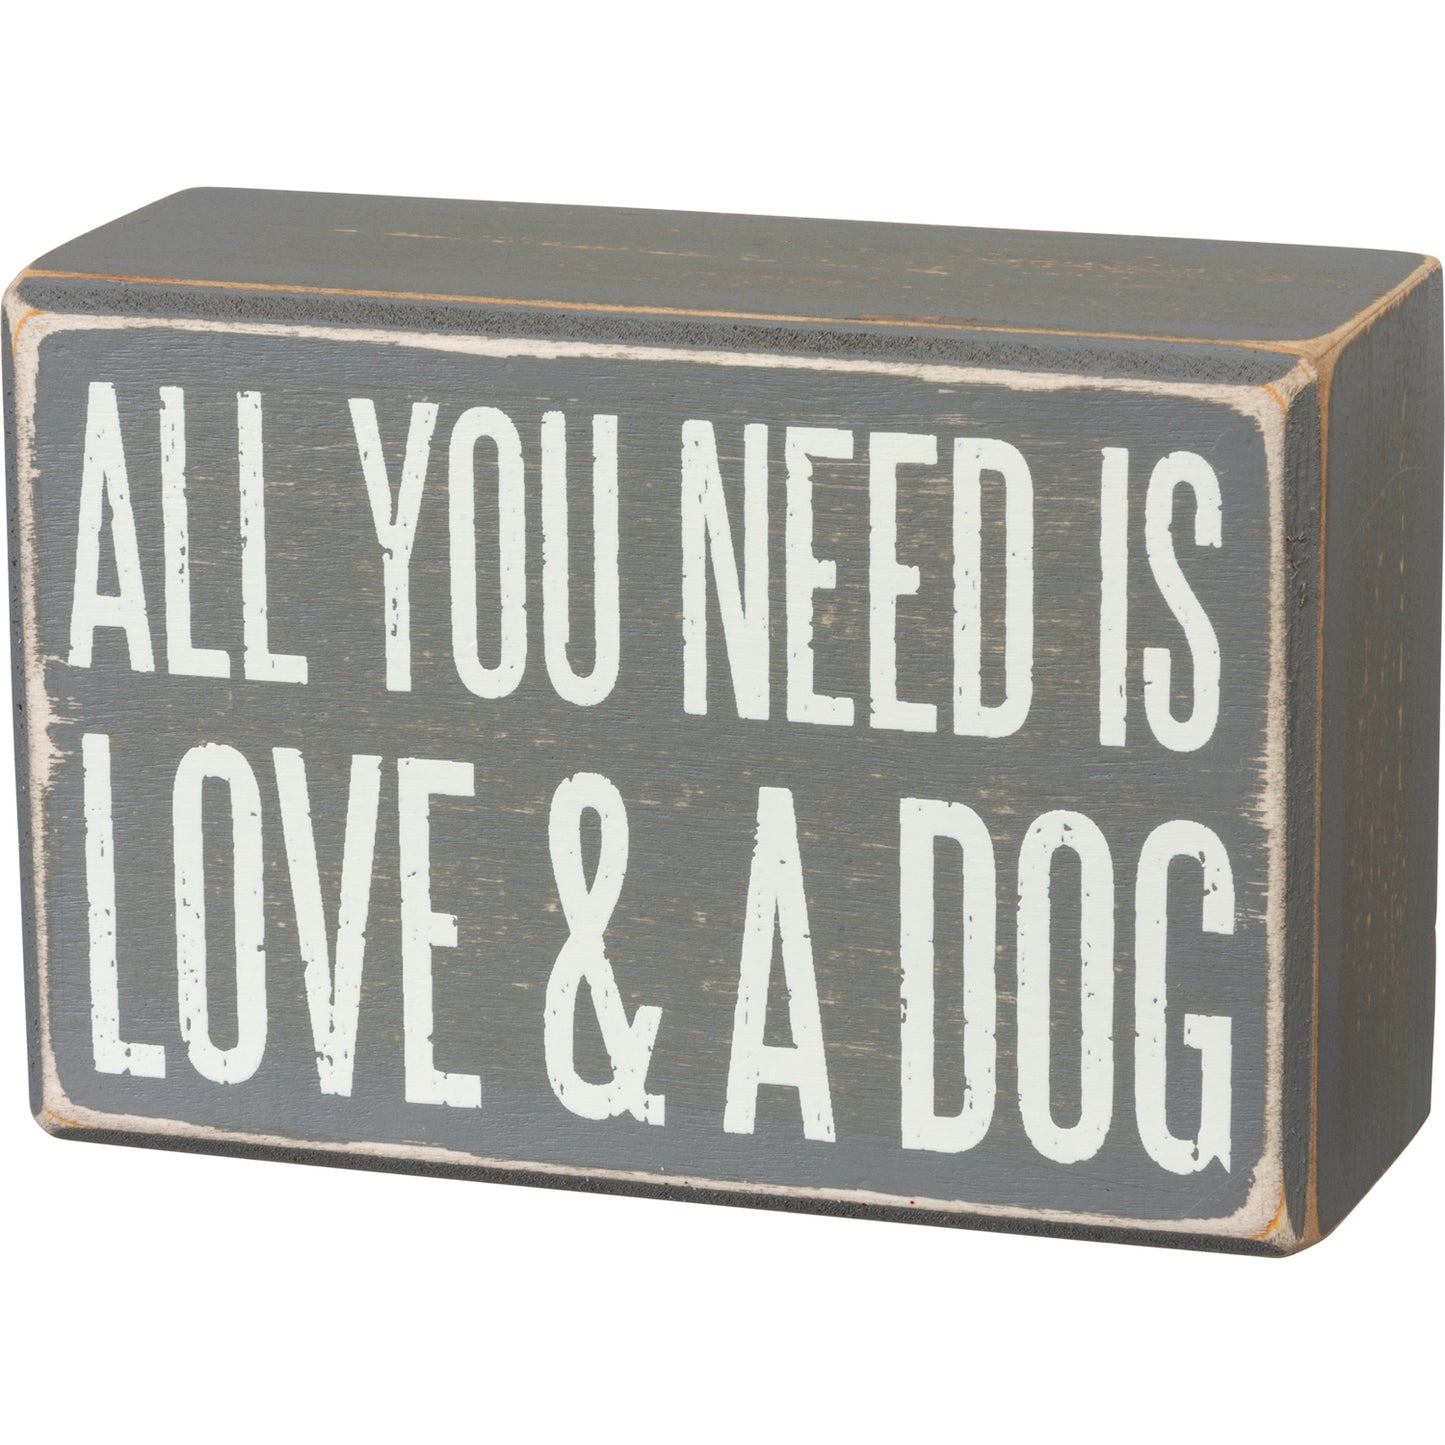 Socks & Box Sign Set "All You Need Is Love & A Dog"